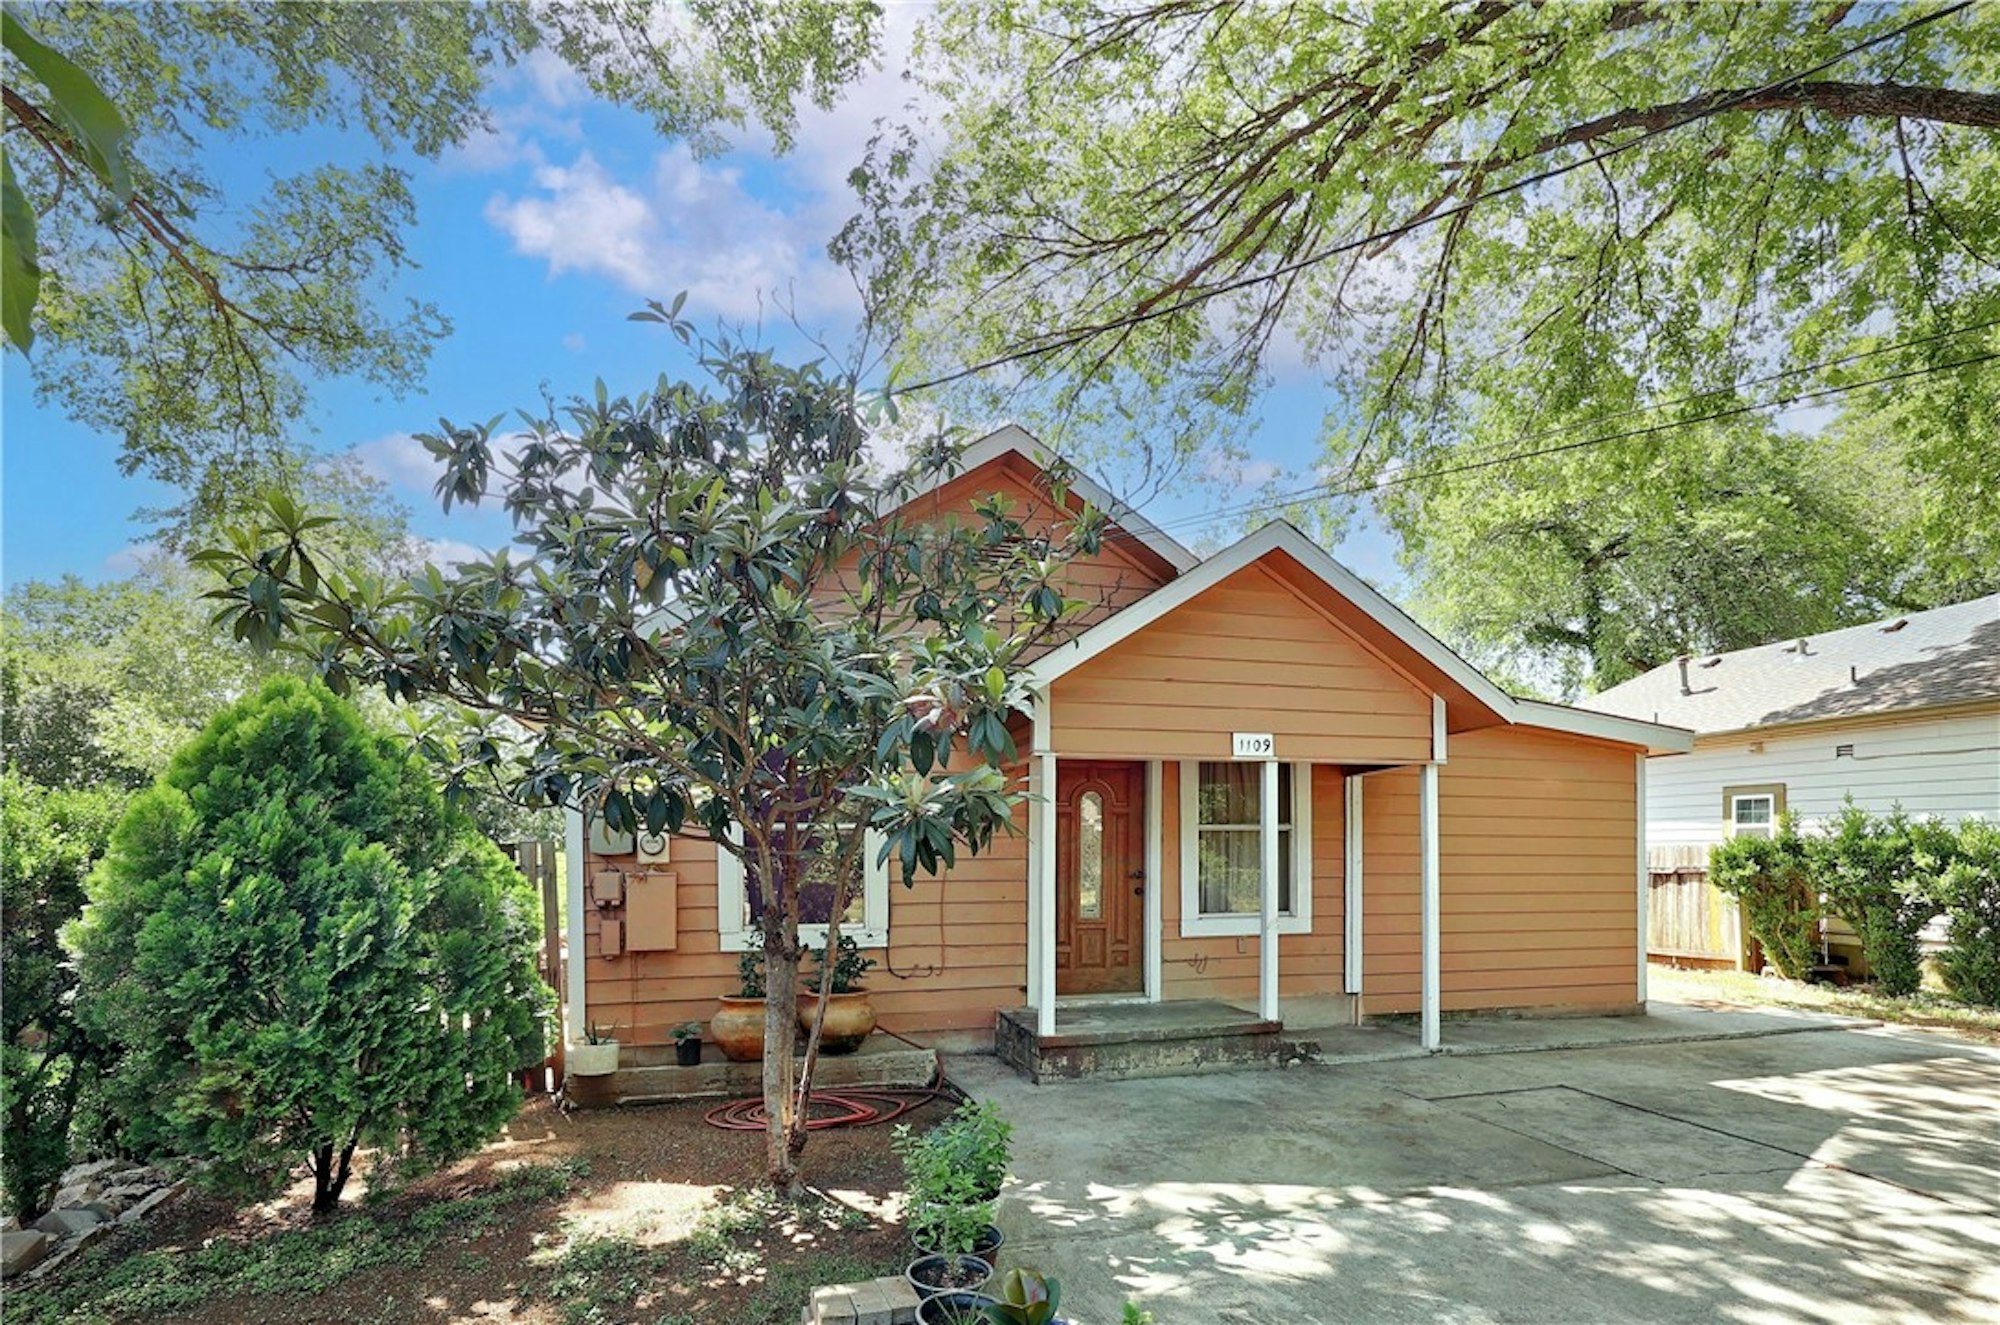 Photo 1 of 10 - 1109 Perry Rd, Austin, TX 78721